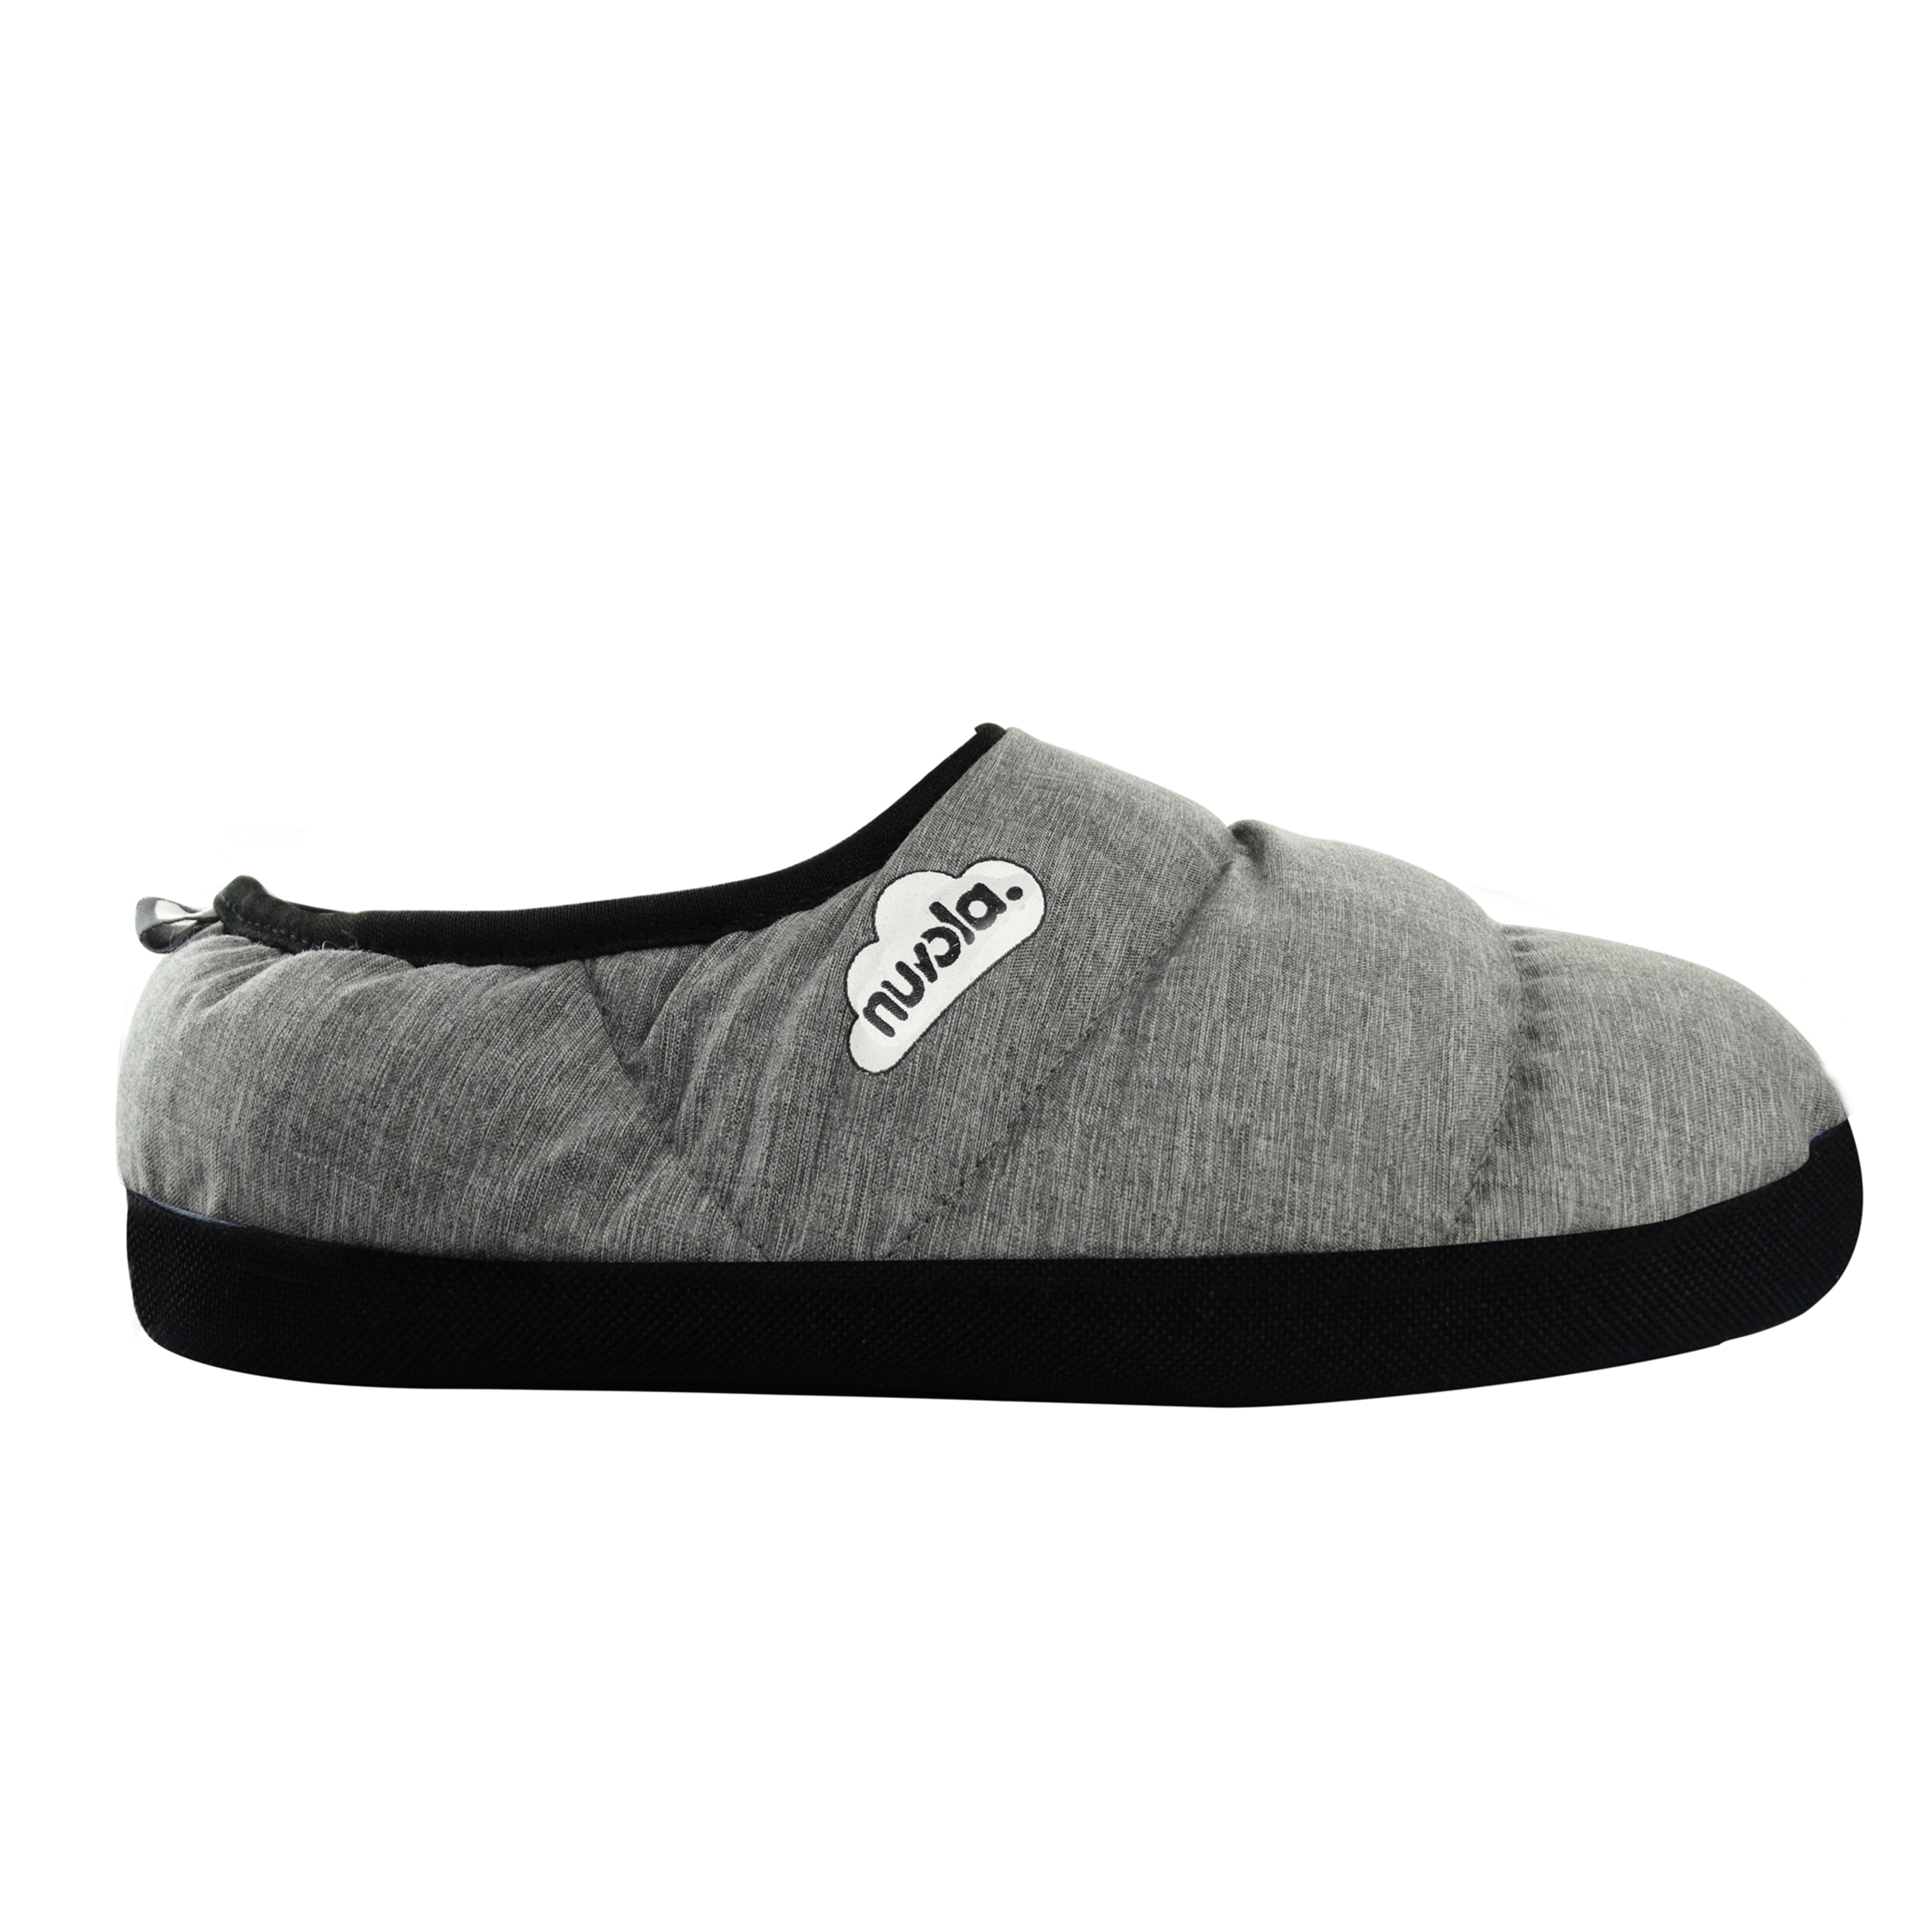 Slippers Camping NuvolaÂ®,marbled Suela De Goma